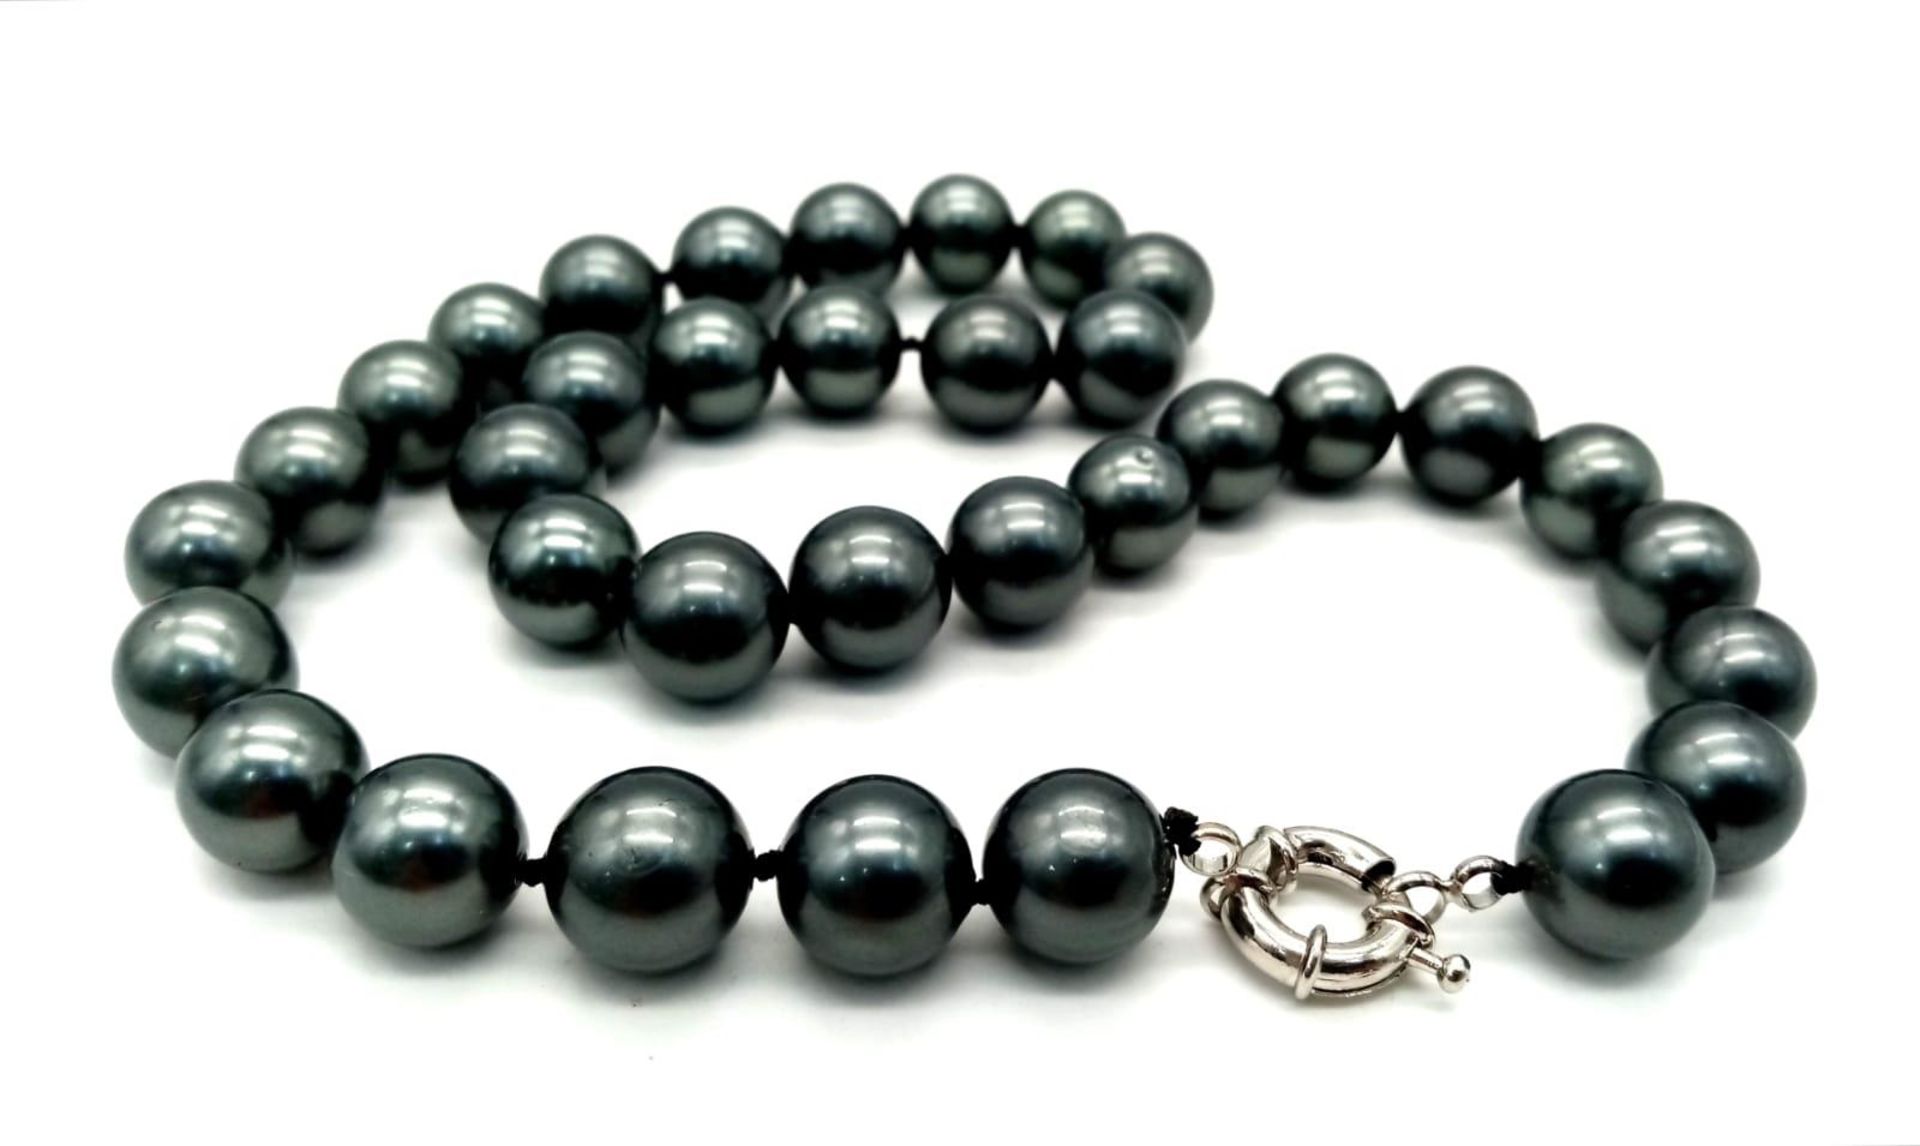 A Metallic Grey South Sea Pearl Shell Necklace. Beads - 12mm. Necklace length - 42cm.